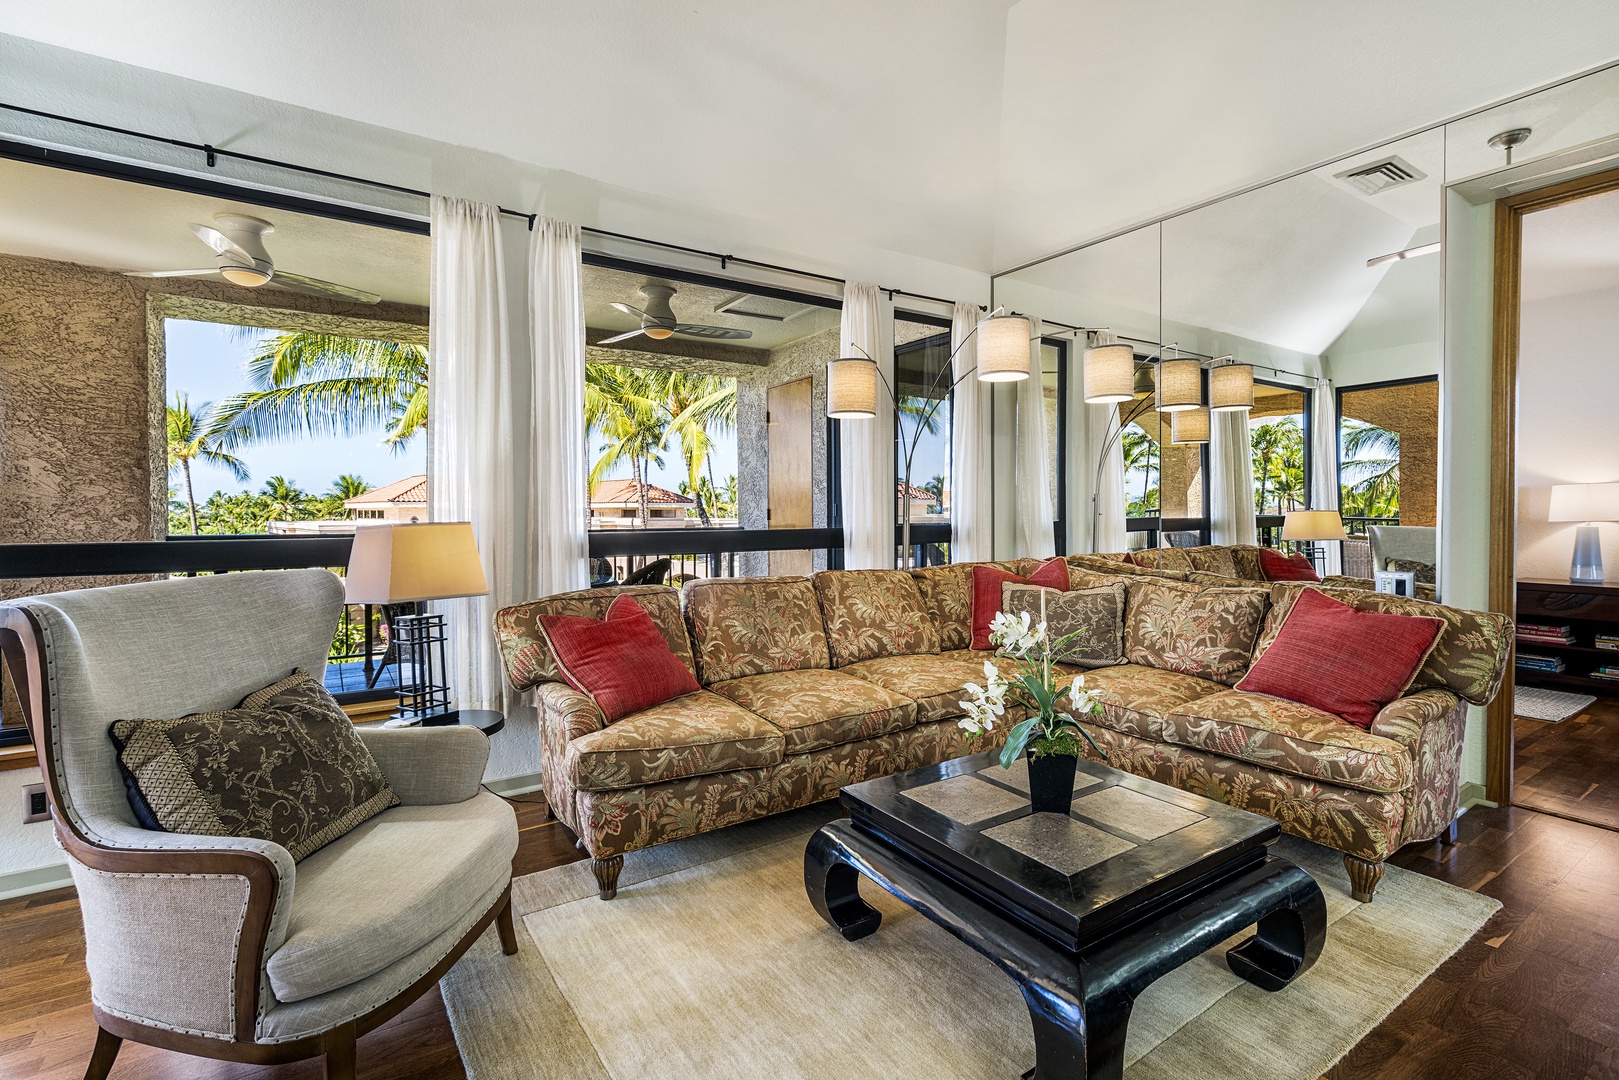 Waikoloa Vacation Rentals, Shores at Waikoloa Beach Resort 332 - Ample seating with space to entertain or simply watch TV